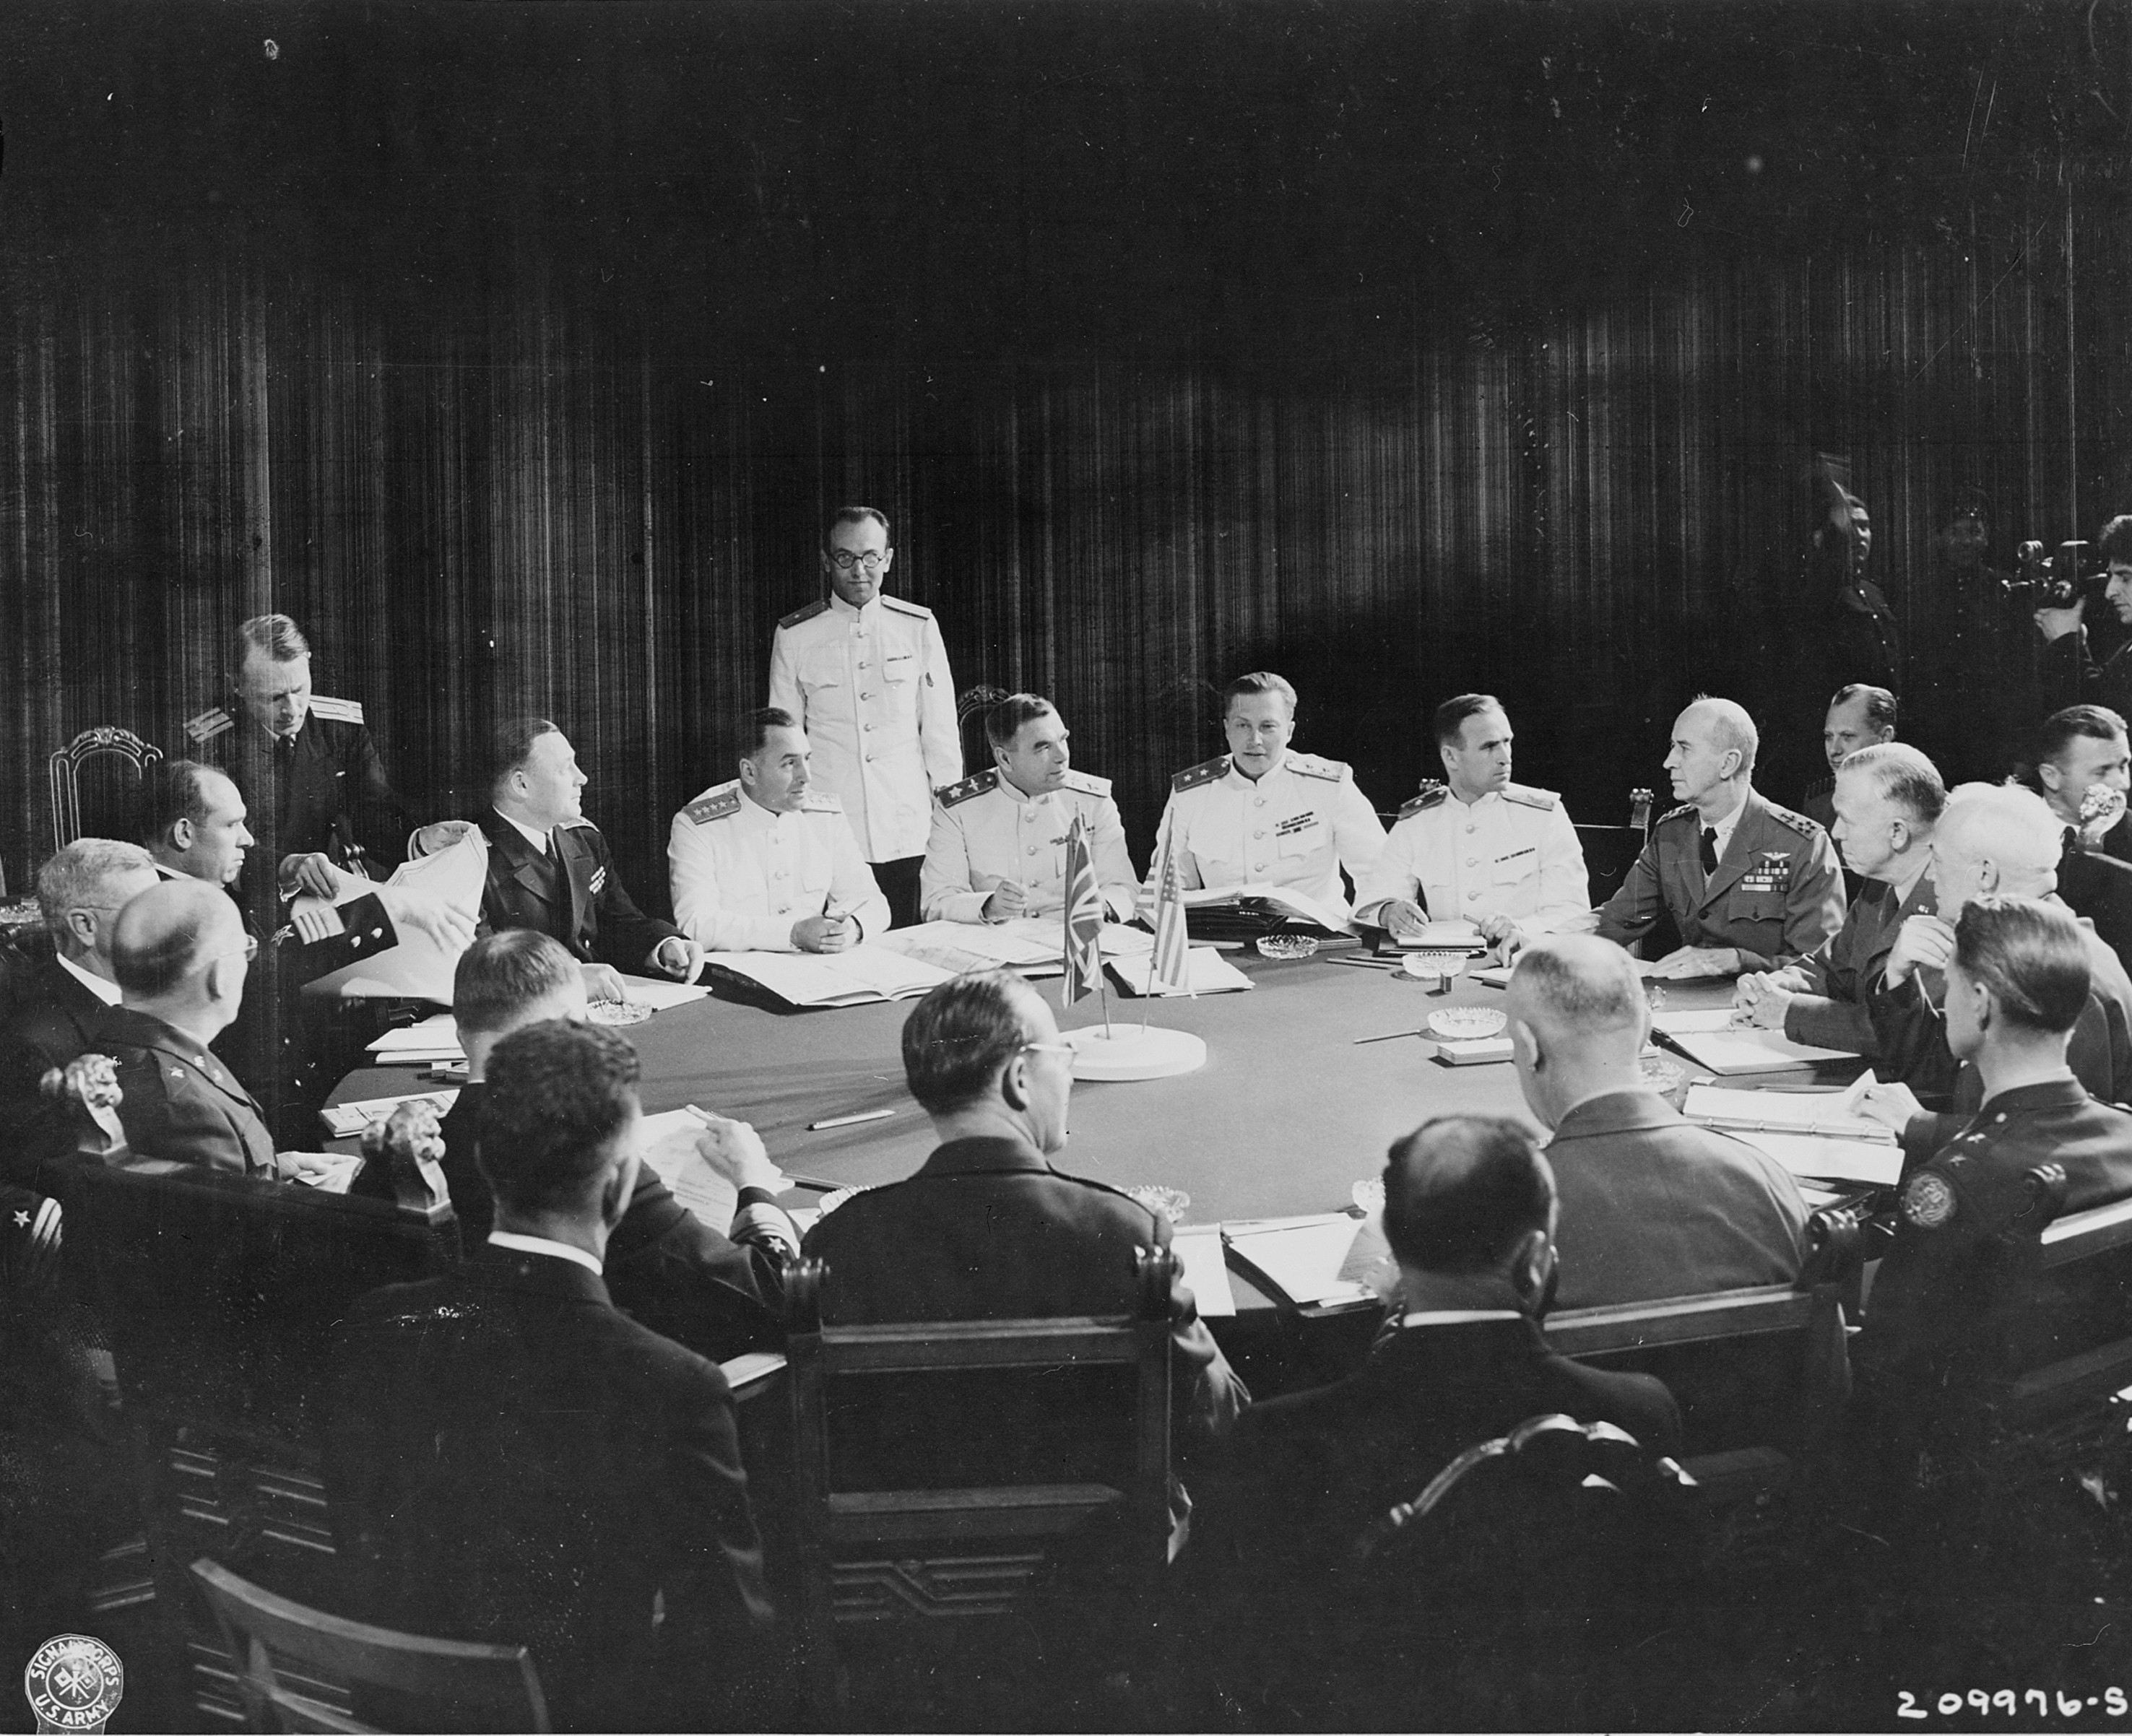 General Alexei Antenoff, General George Marshall, General Henry Arnold, Admiral Ernest King, and other Allied officers meeting during the Potsdam Conference, Germany, 27 Jul 1945, photo 1 of 2